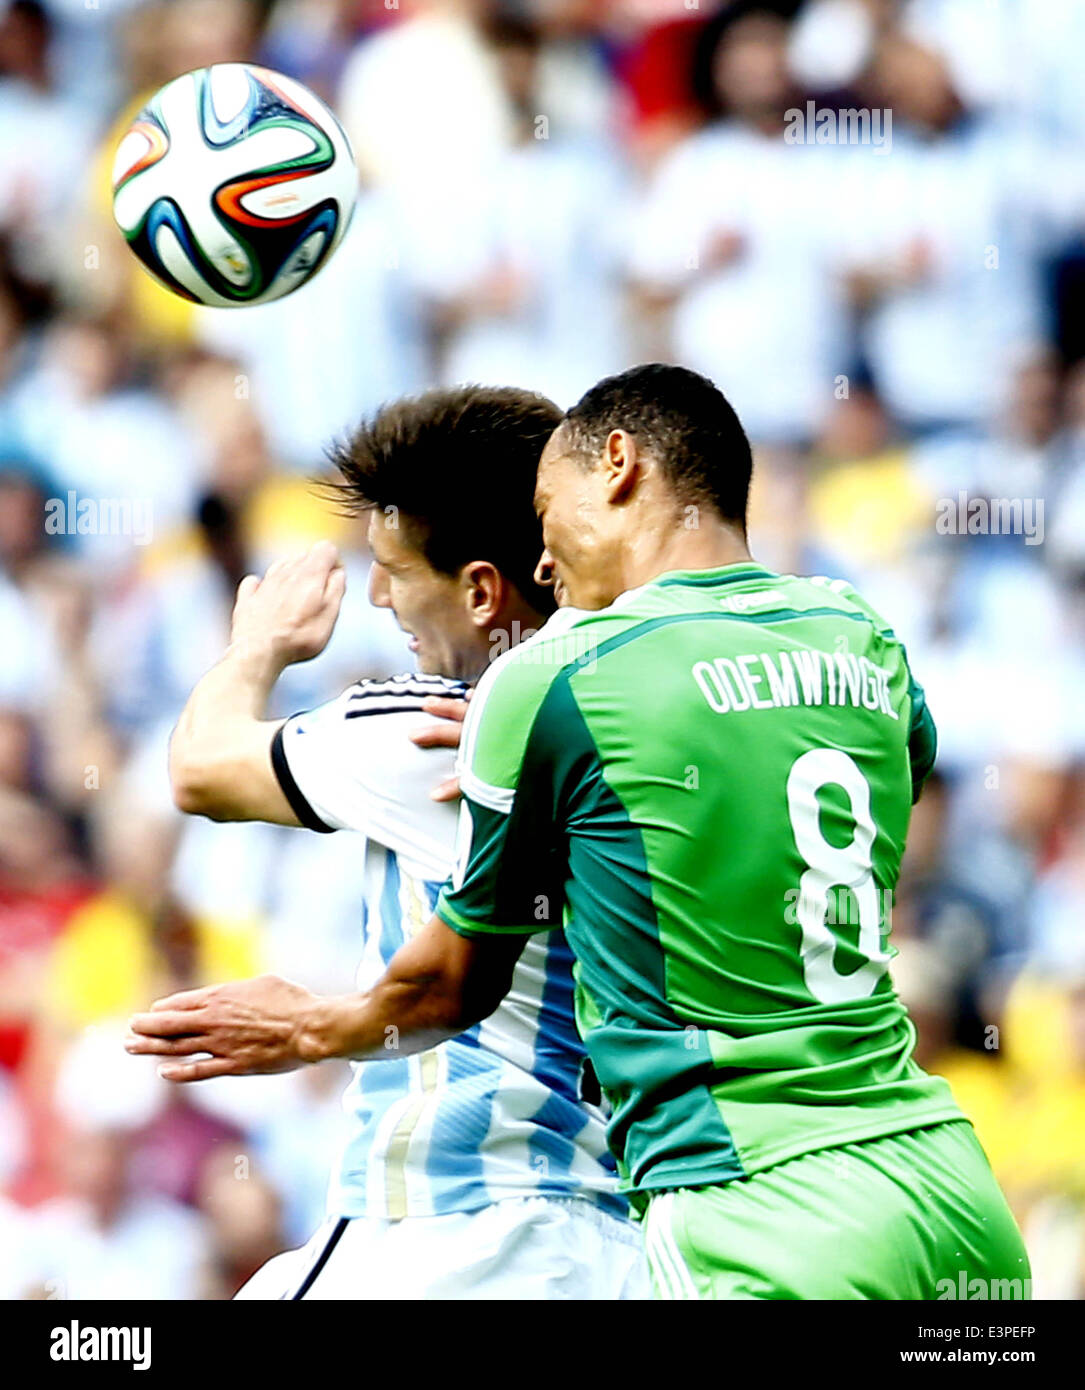 Porto Alegre, Brazil. 25th June, 2014. Nigeria's Peter Osaze Odemwingie (R) competes for a header during a Group F match between Nigeria and Argentina of 2014 FIFA World Cup at the Estadio Beira-Rio Stadium in Porto Alegre, Brazil, on June 25, 2014. © Chen Jianli/Xinhua/Alamy Live News Stock Photo